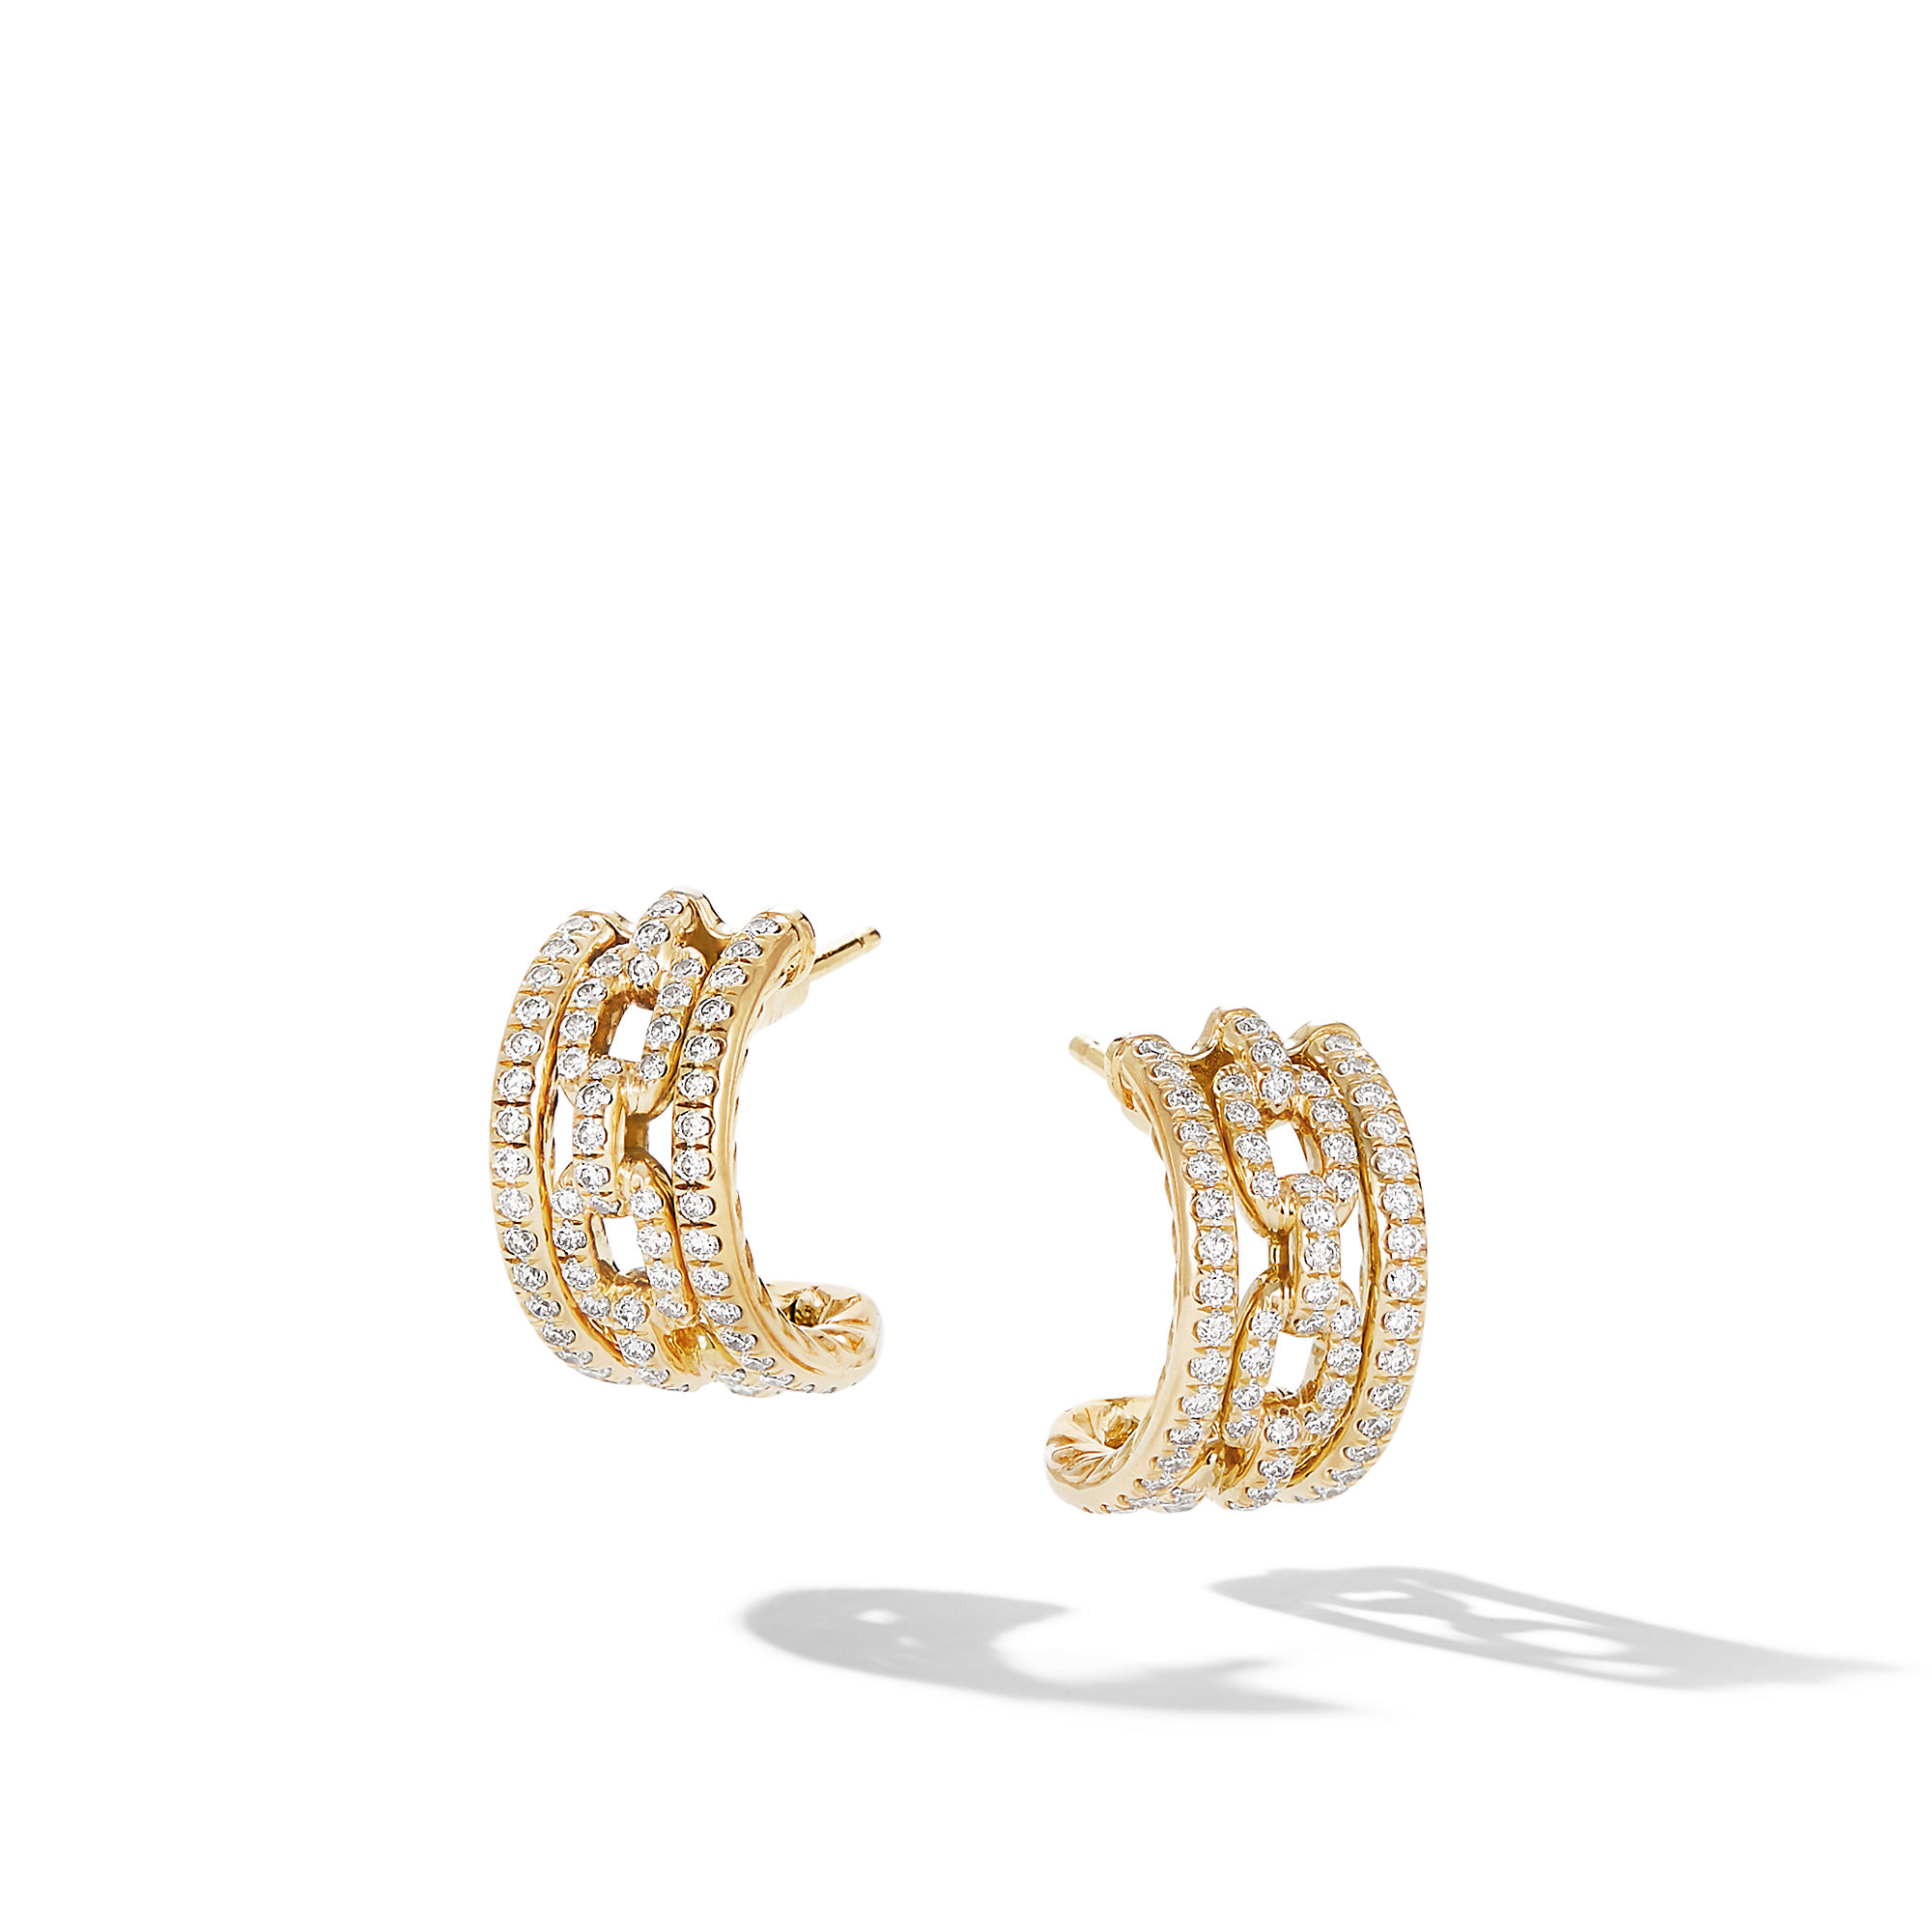 Stax Chain Link Huggie Hoop Earrings in 18K Yellow Gold with Pave Diamonds